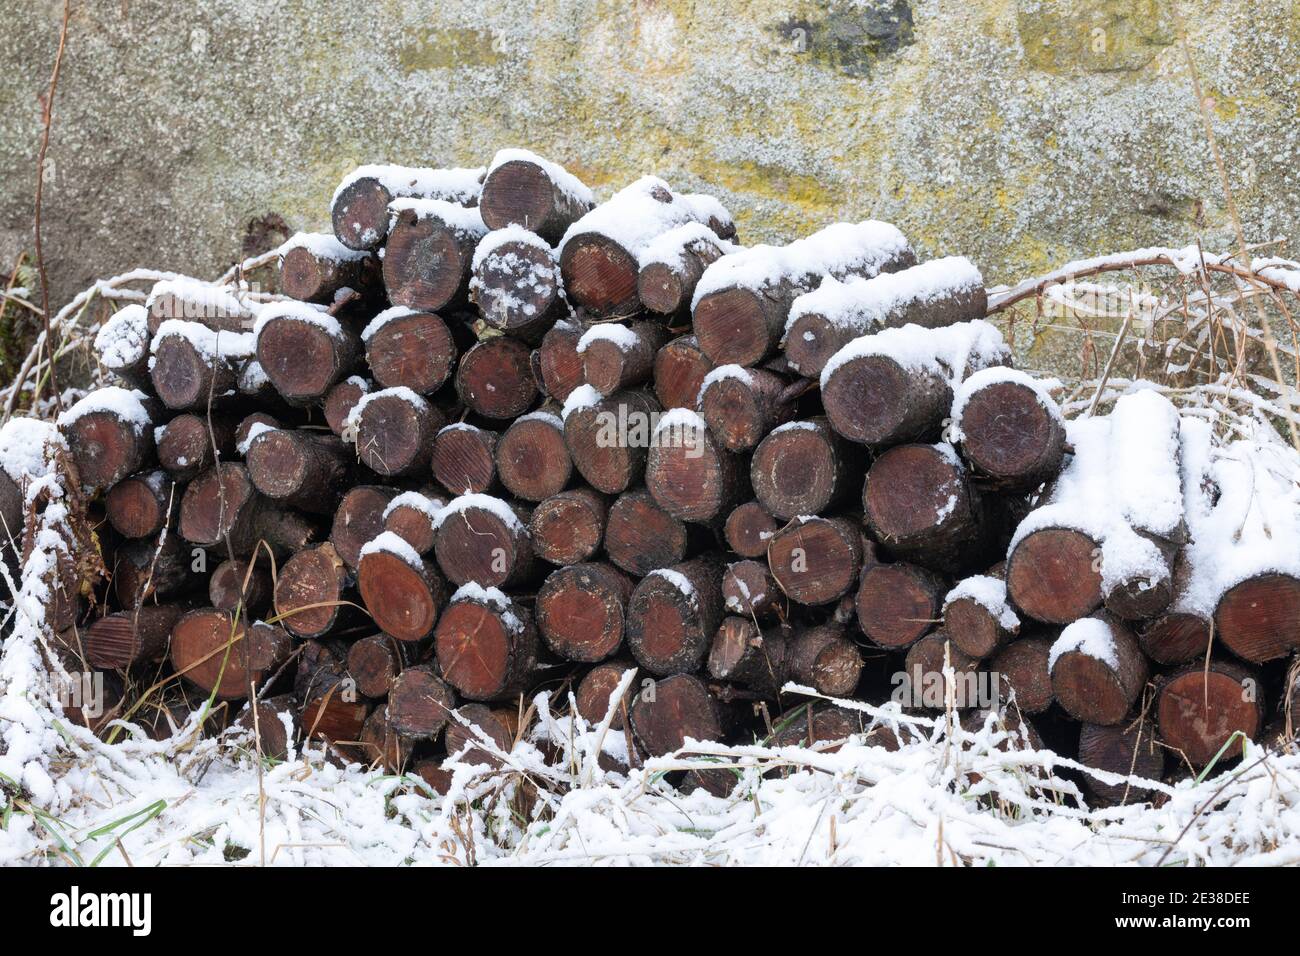 A Pile of Unseasoned Logs Covered with Snow Stock Photo